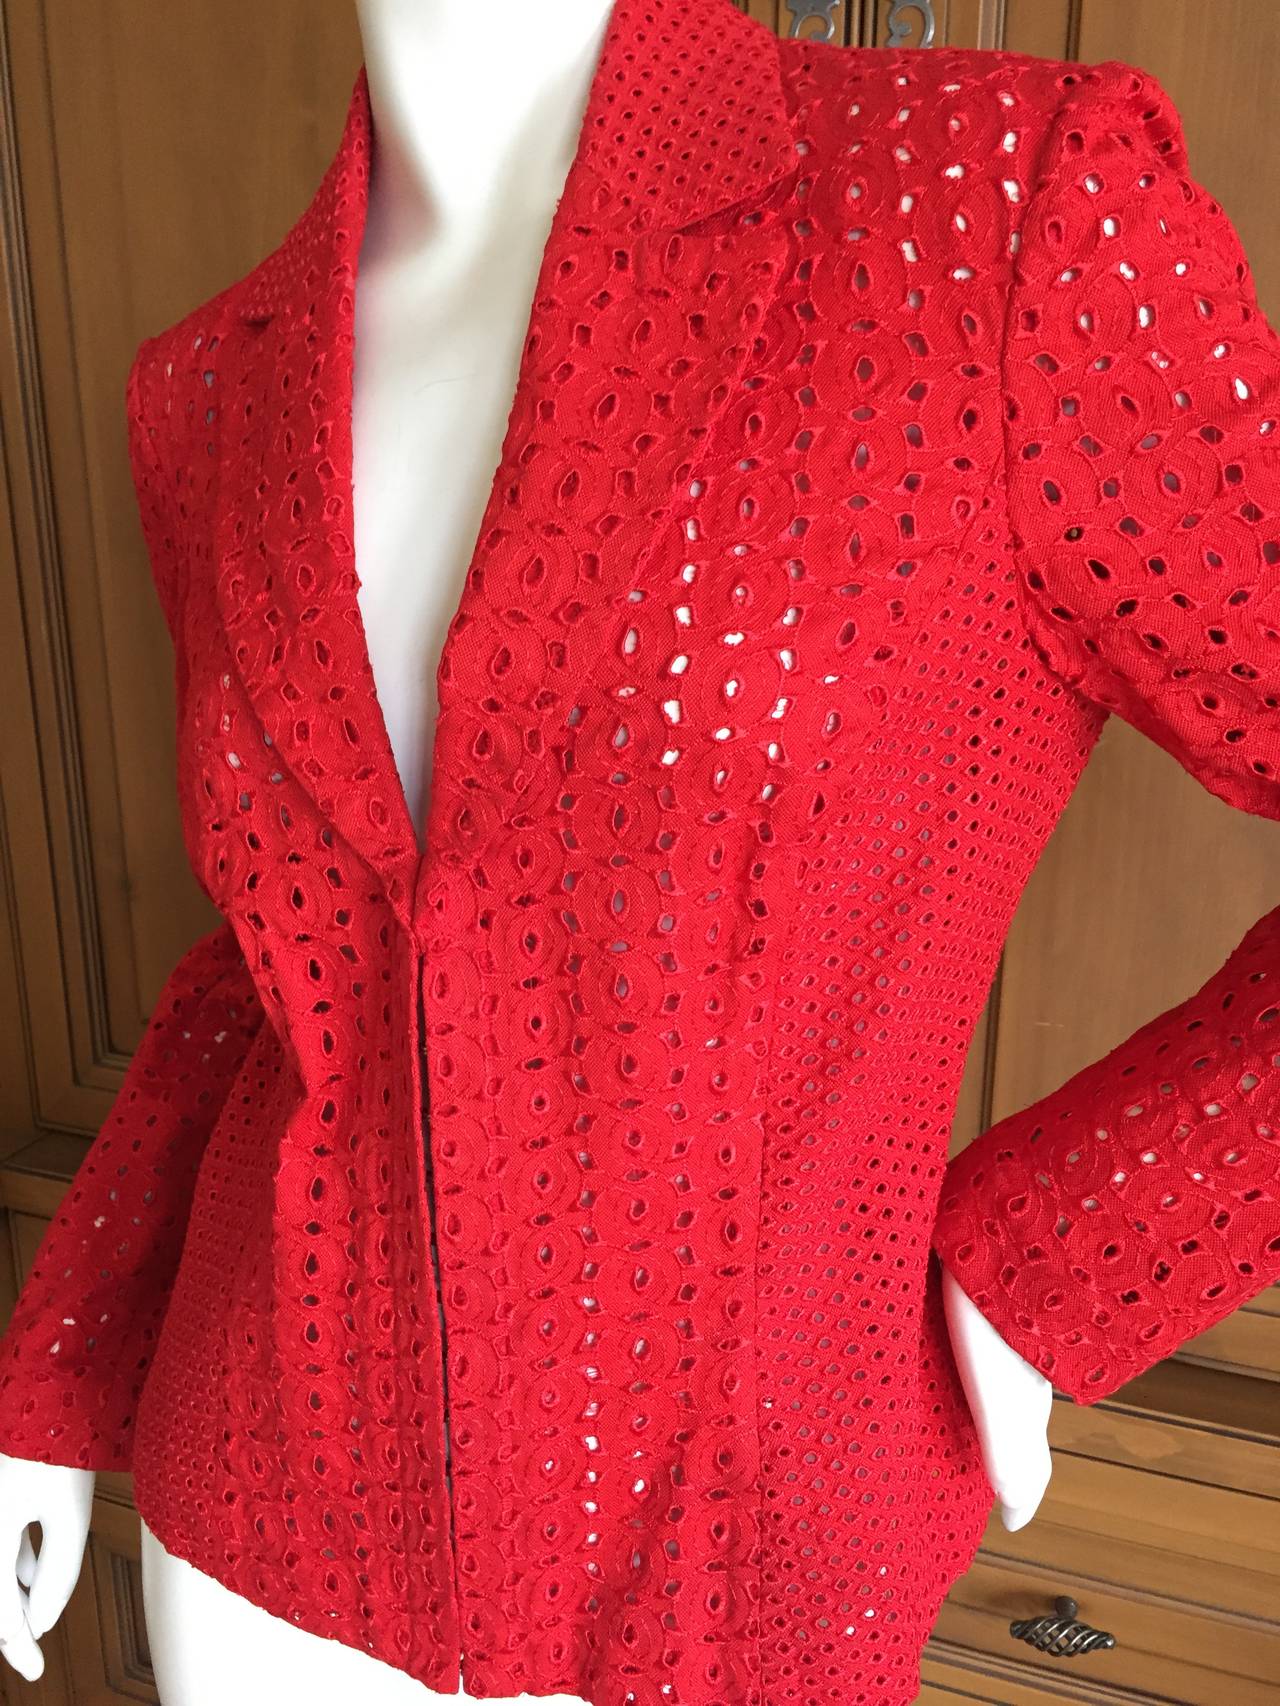 Gianni Versace Couture Vintage Red Embroidered Eyelet Jacket.
This is an early jacket, unlined so it is sheer.
Size 44
Bust 38"
Waist 31"
Length 23"